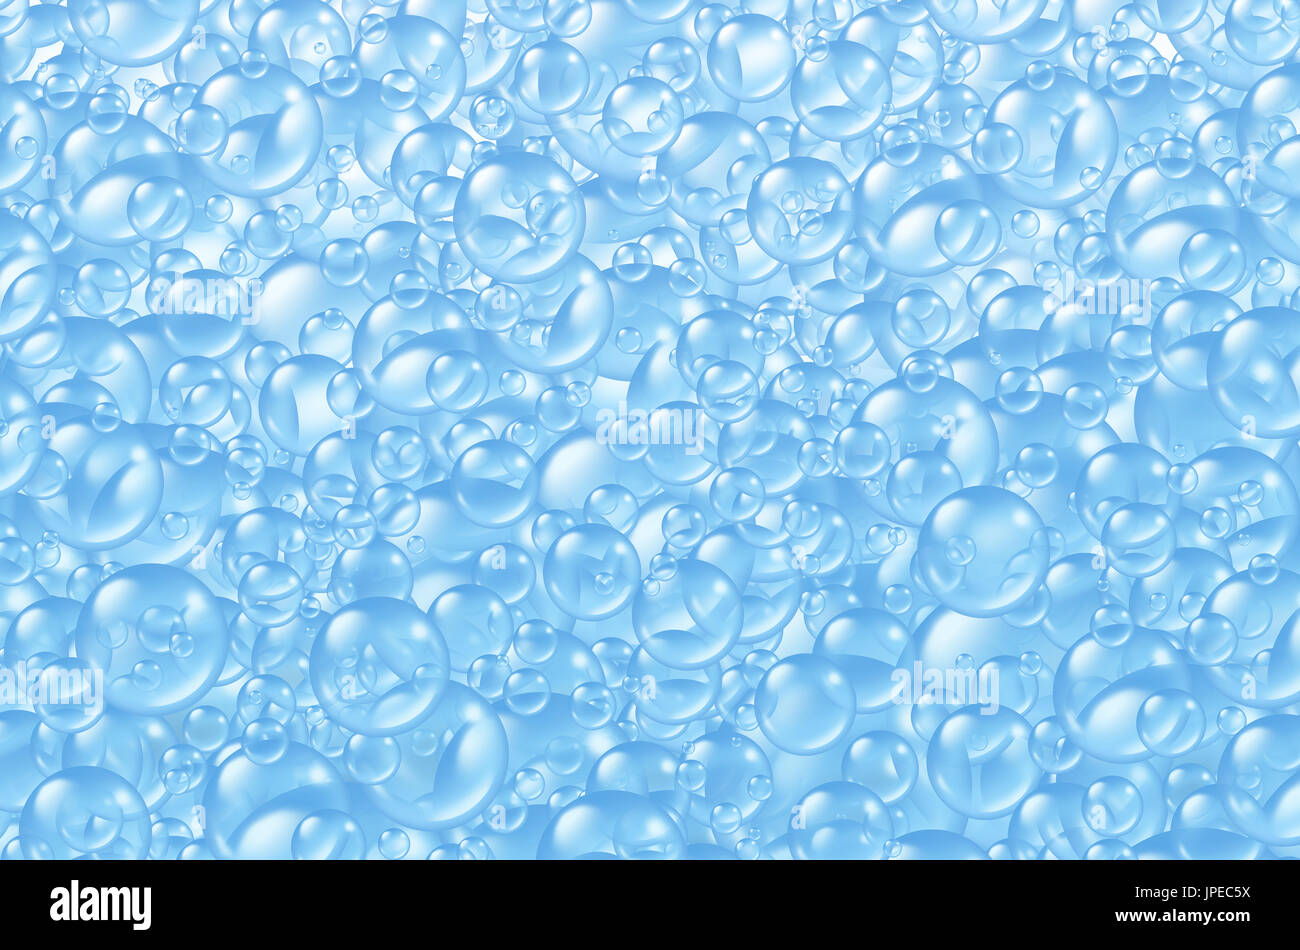 Bubbles background with transparent bath soap suds as a bunch of foam spheres in many circular sizes floating as clean blue symbols of washing. Stock Photo